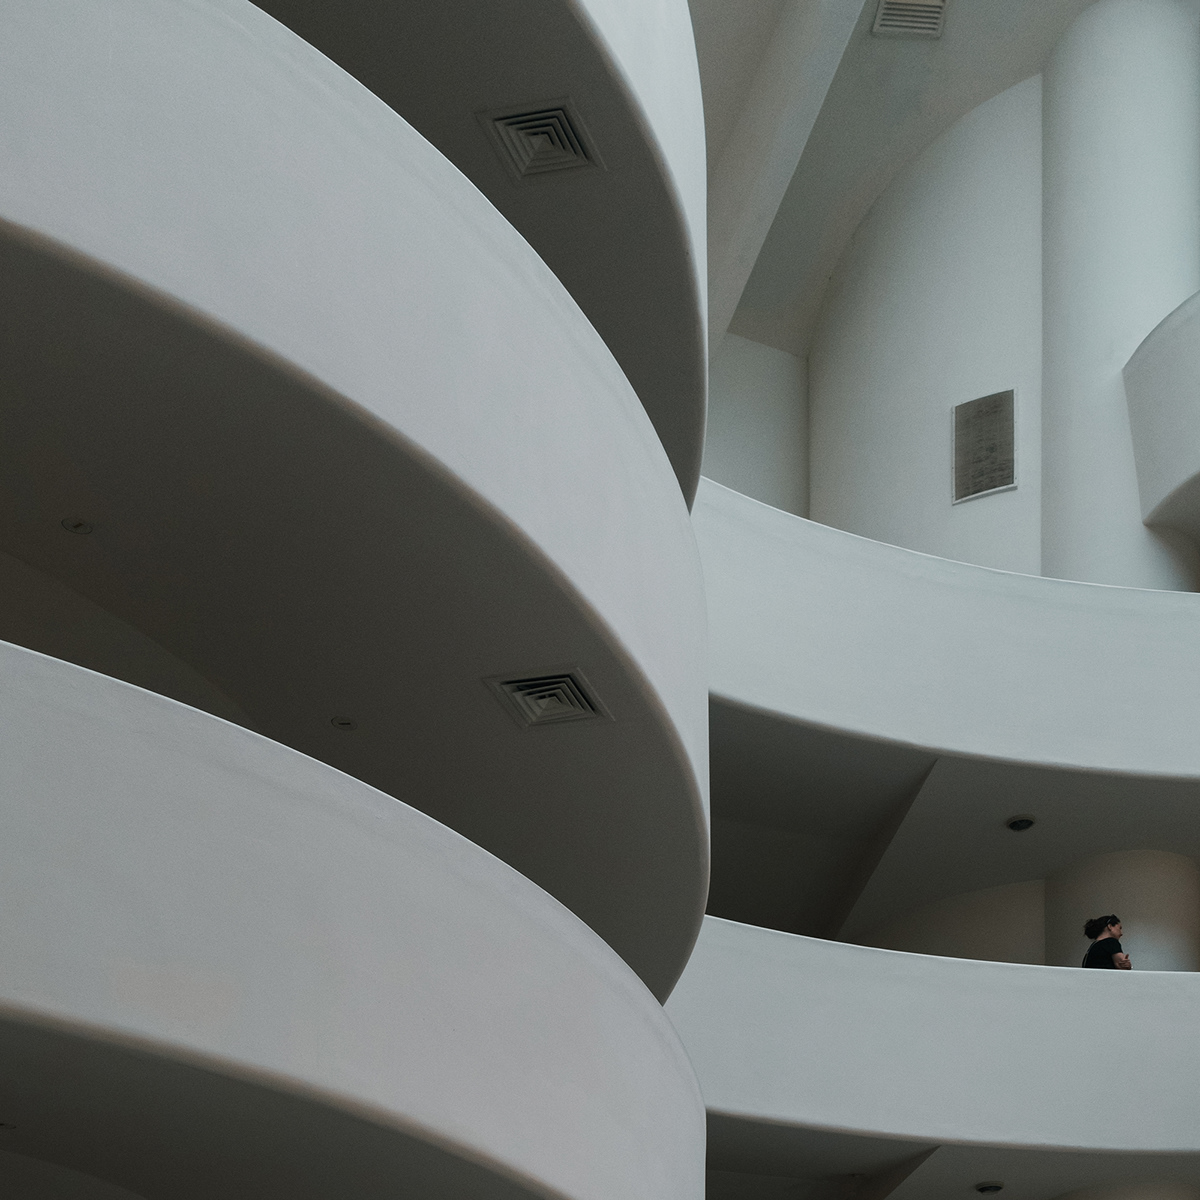 Photography  guggenheim museum minimal abstract art architecture concrete New York united states